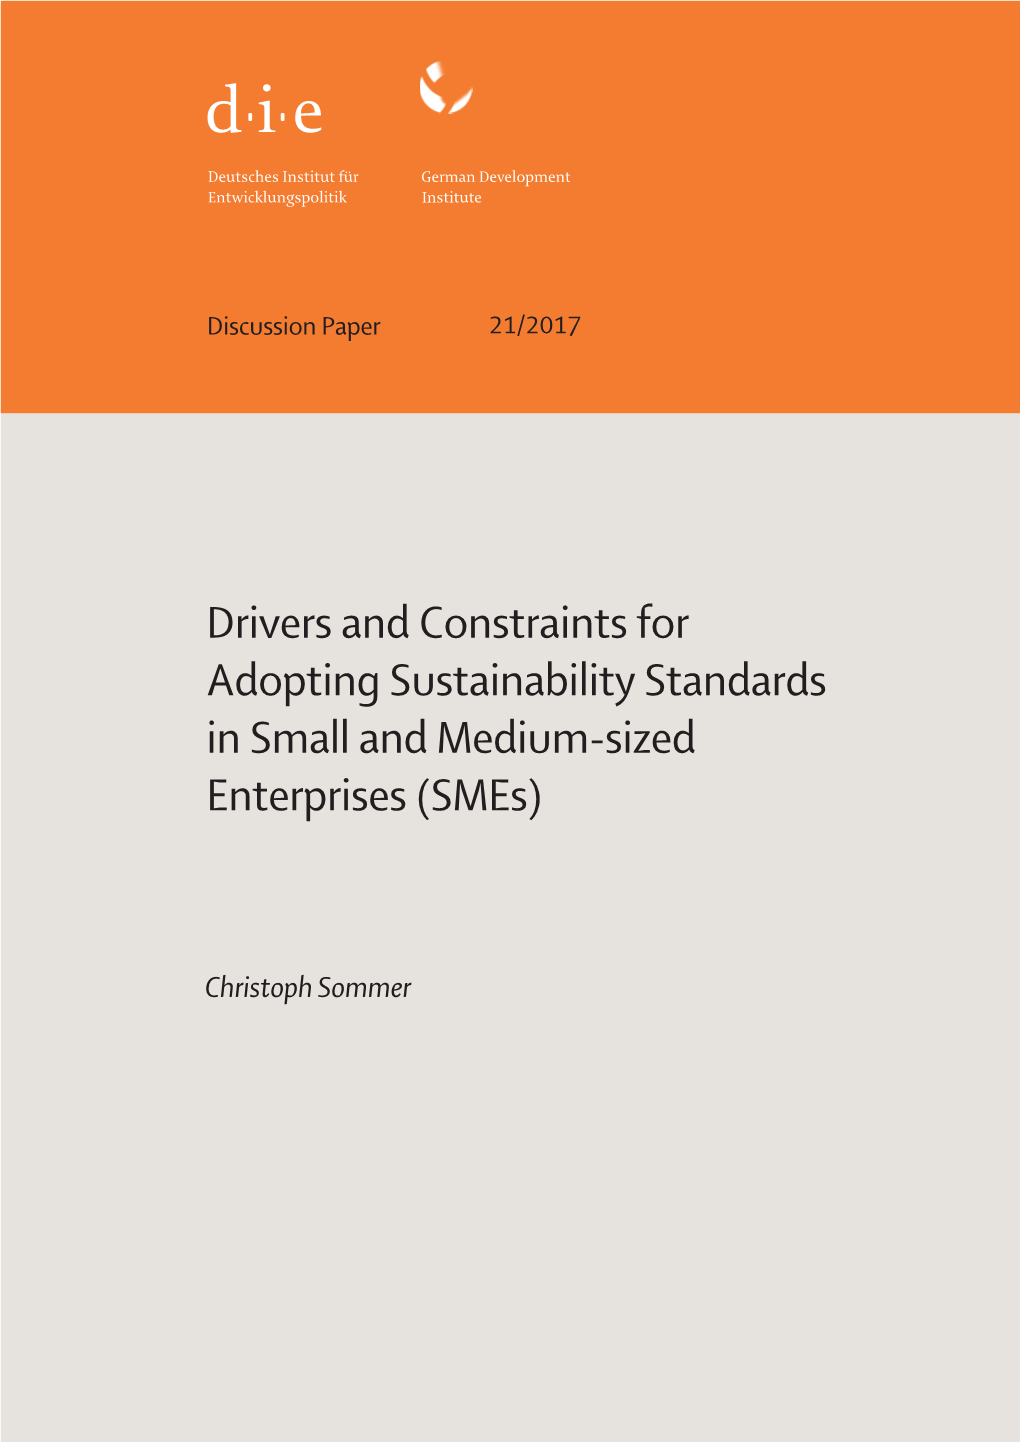 Drivers and Constraints for Adopting Sustainability Standards in Small and Medium-Sized Enterprises (Smes)